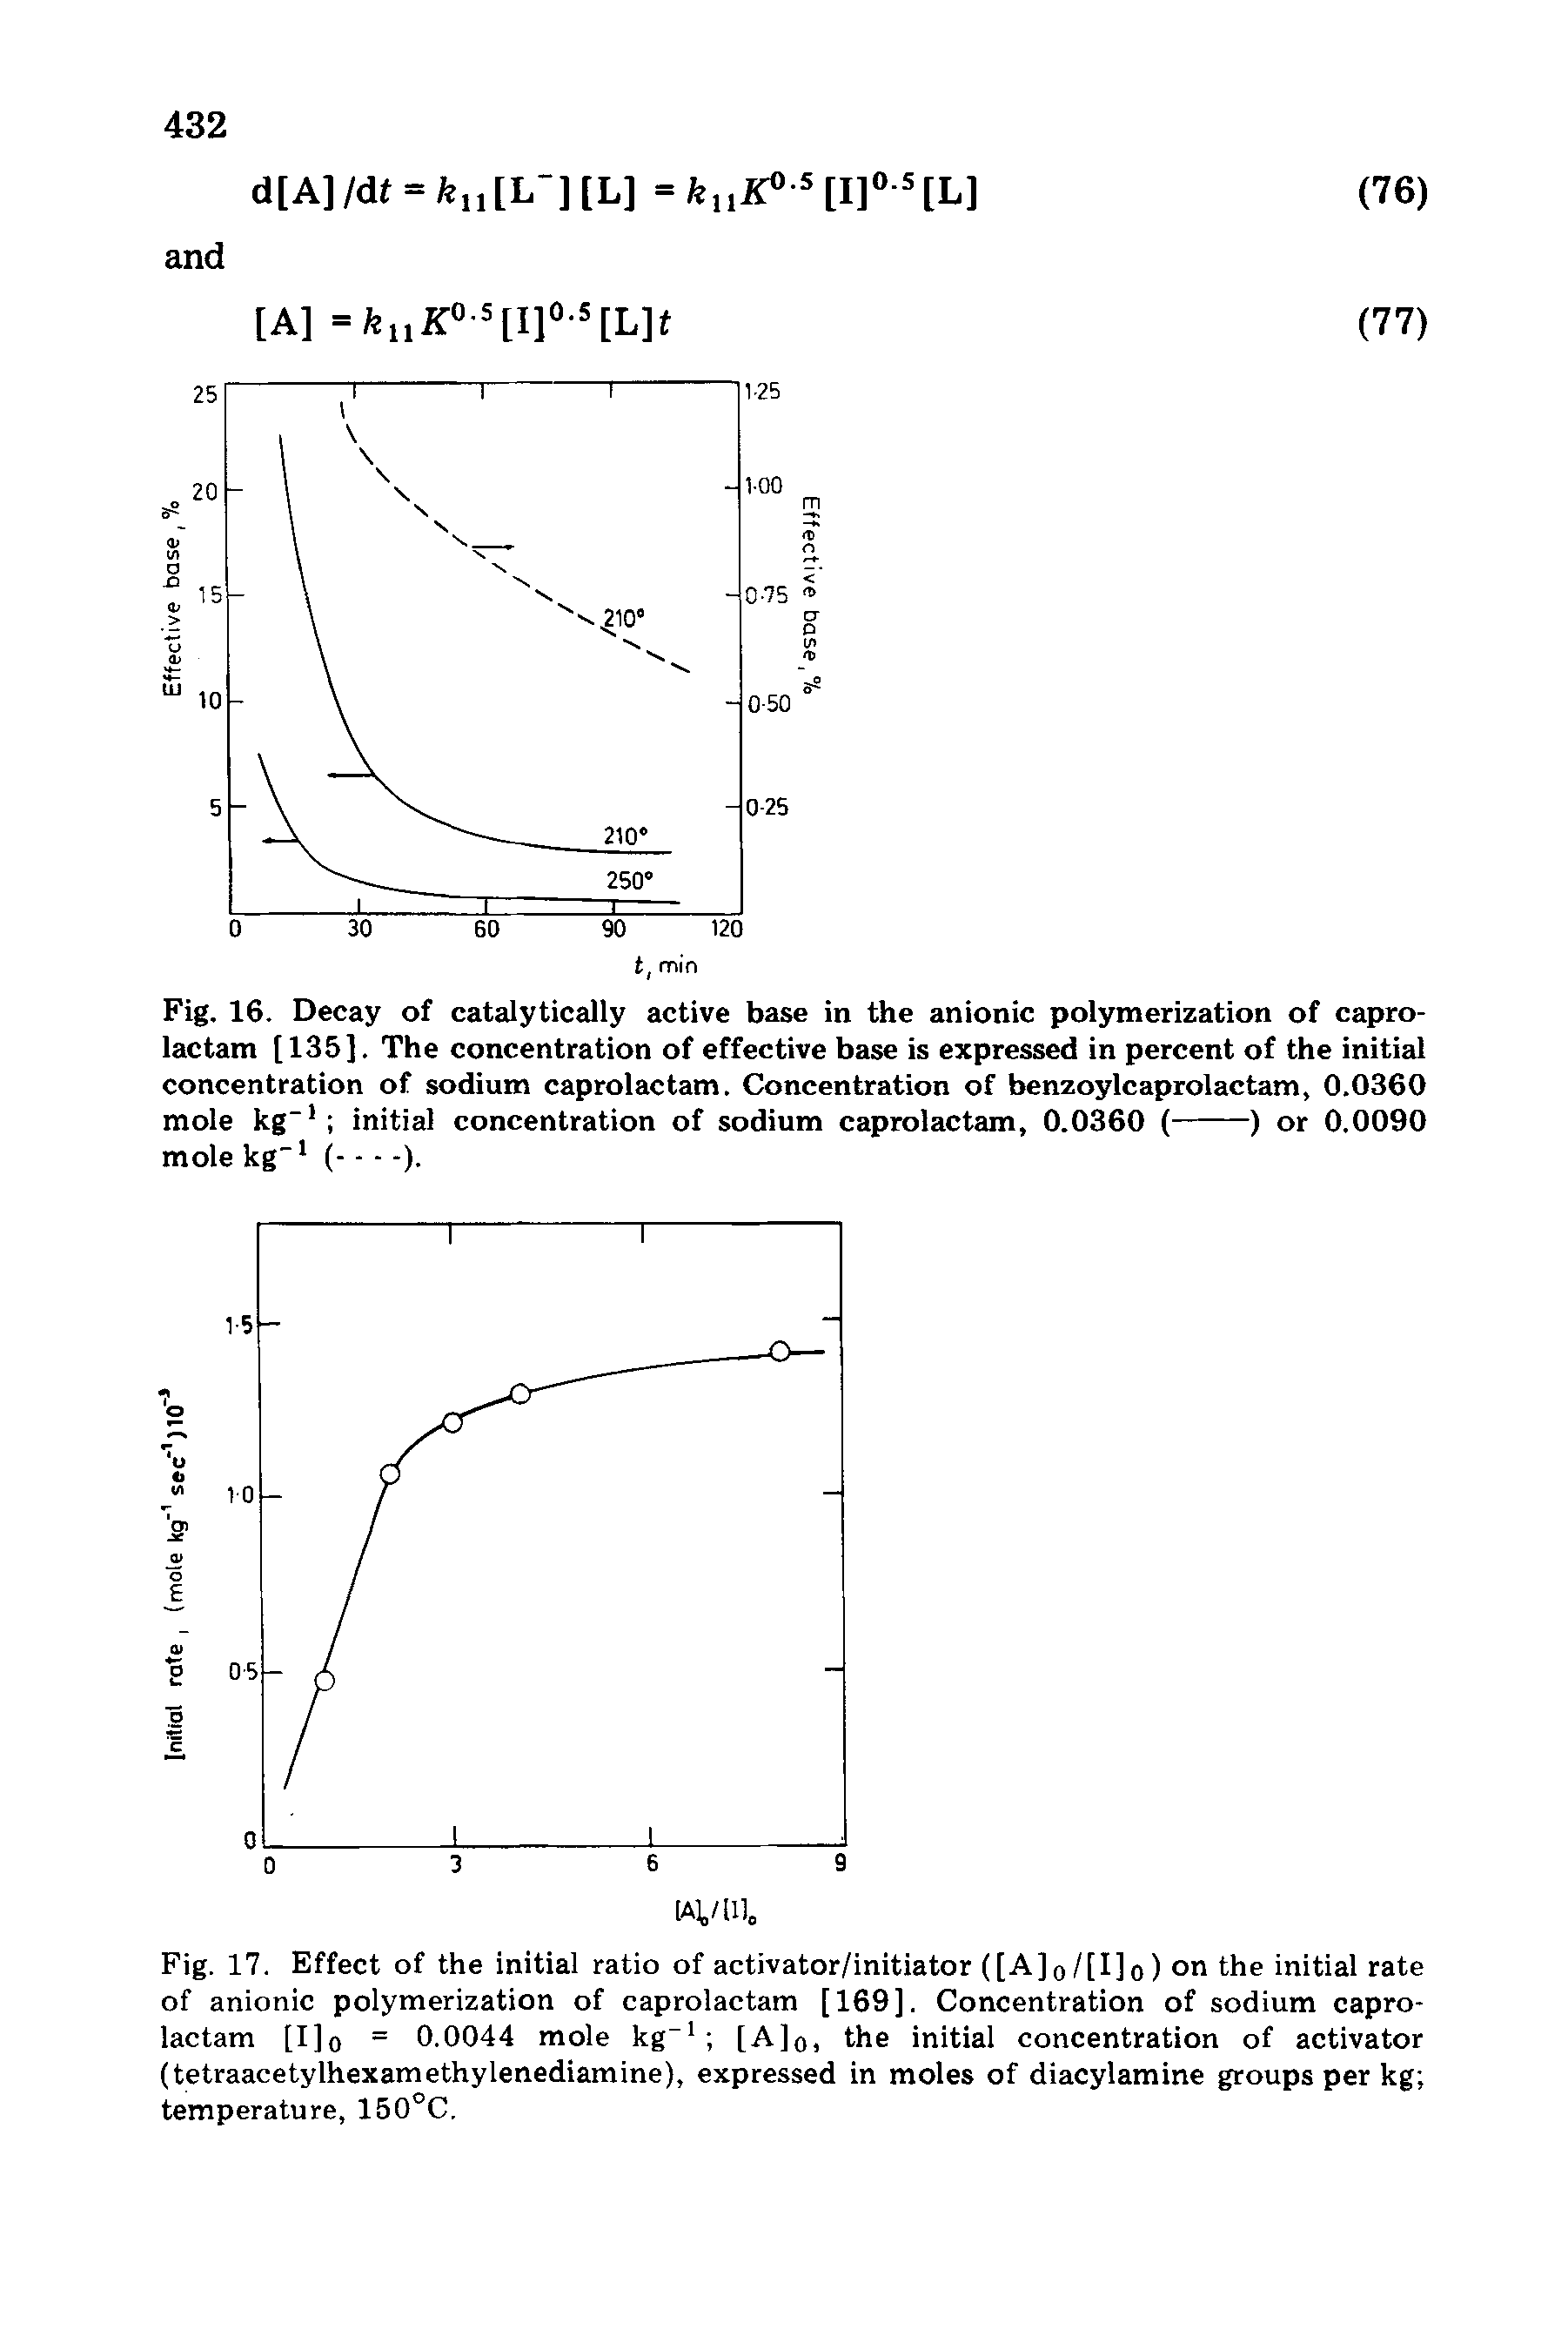 Fig. 17. Effect of the initial ratio of activator/initiator ([A]o/[I]o) on the initial rate of anionic polymerization of caprolactam [169]. Concentration of sodium caprolactam [I]o = 0.0044 mole kg [A]q, the initial concentration of activator (tetraacetylhexamethylenediamine), expressed in moles of diacylamine groups per kg temperature, 150°C.